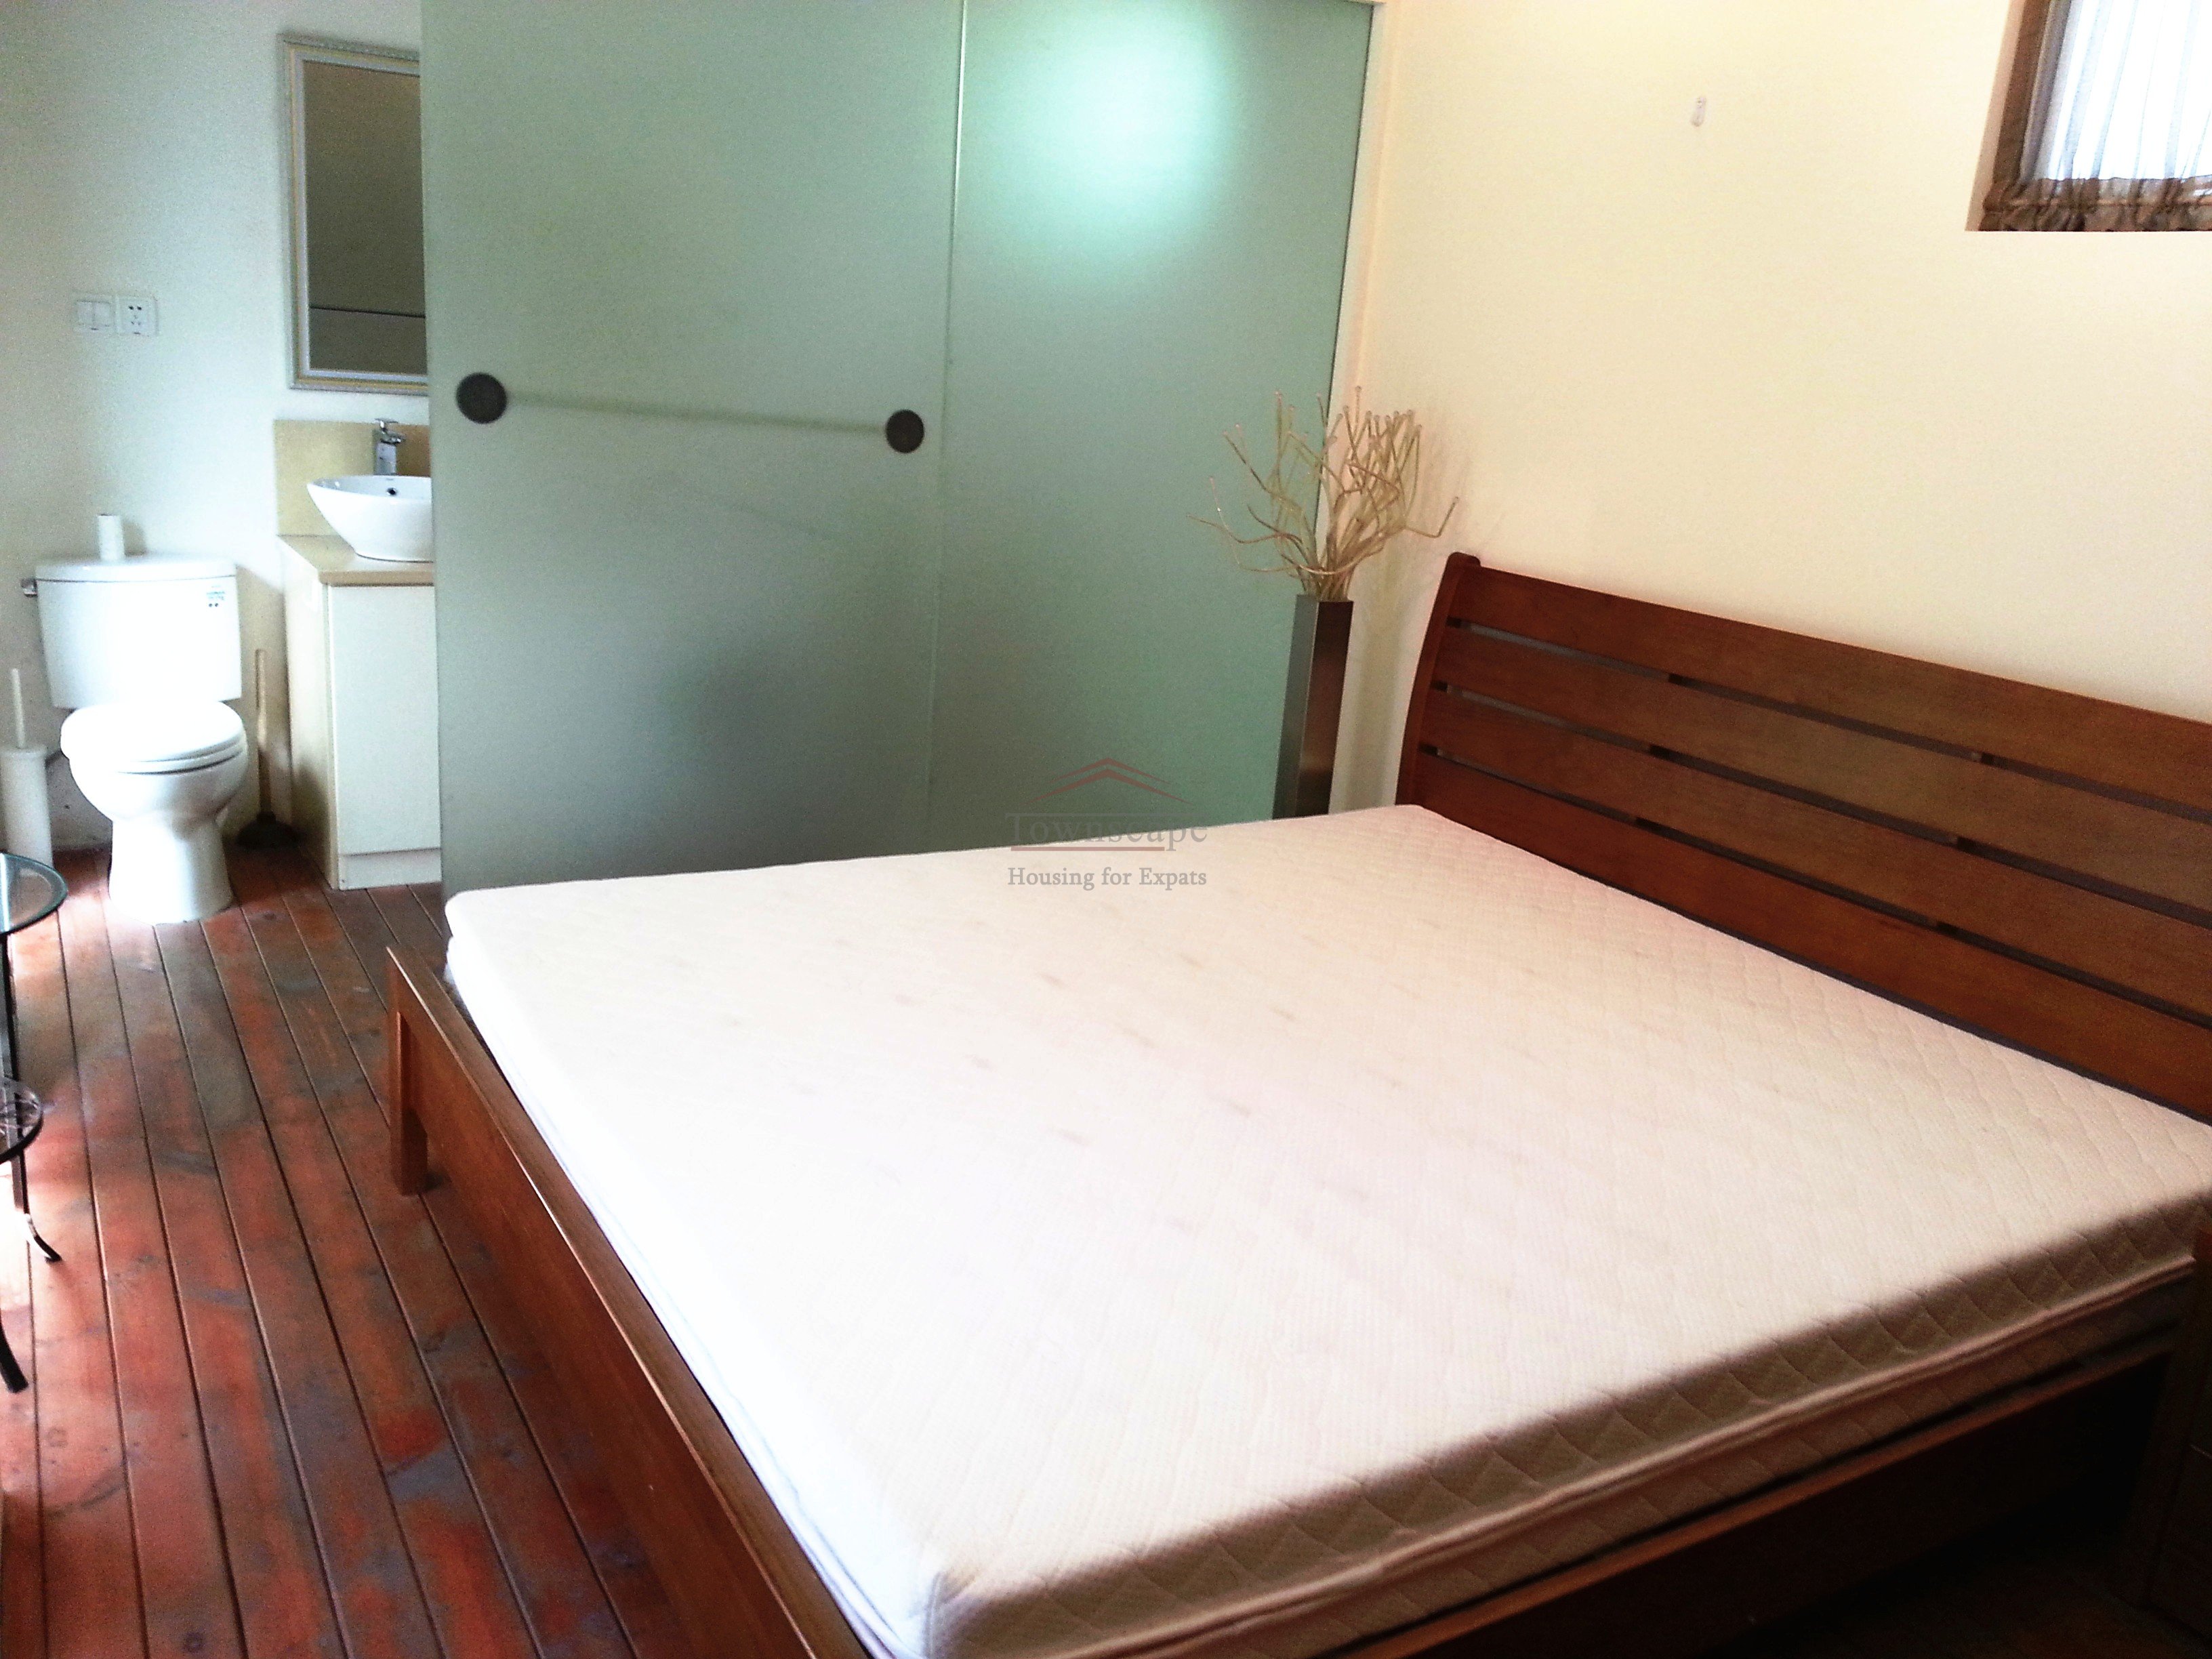 Shanghai Apartments rent Excellent Central 2Br near line 1,7,10 on Fuxing Road